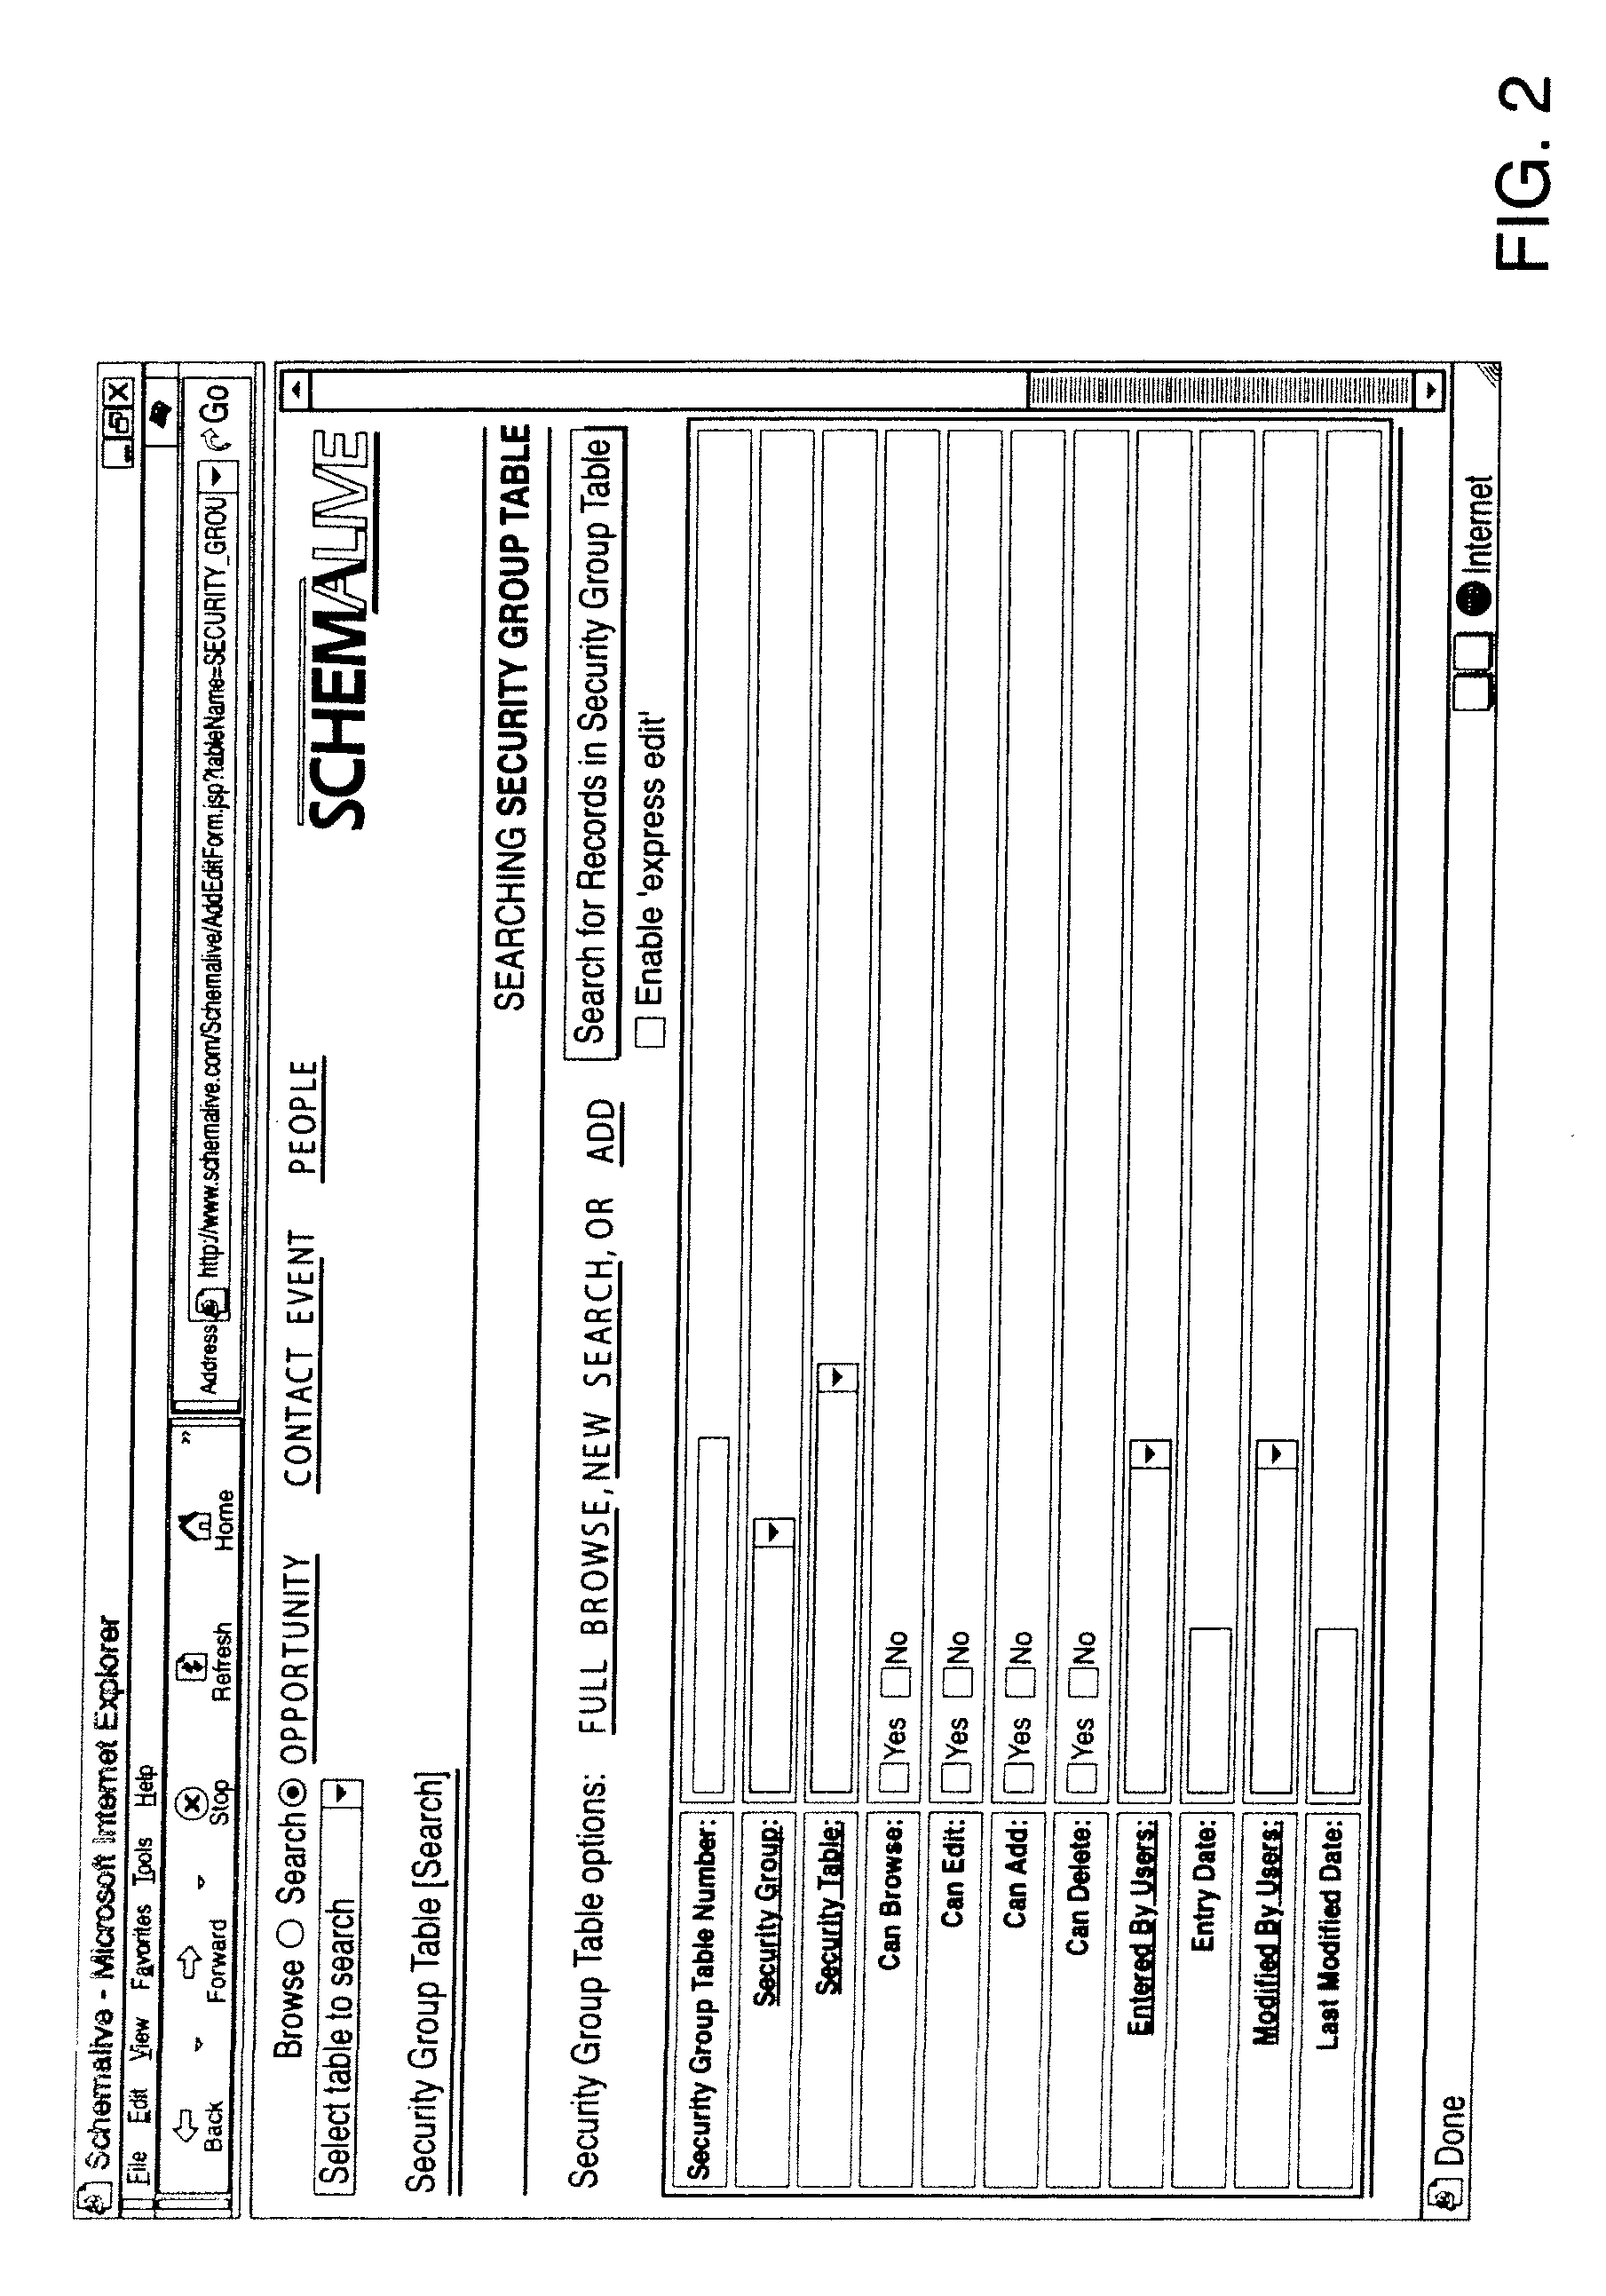 System and Method for Generating Automatic User Interface for Arbitrarily Complex or Large Databases